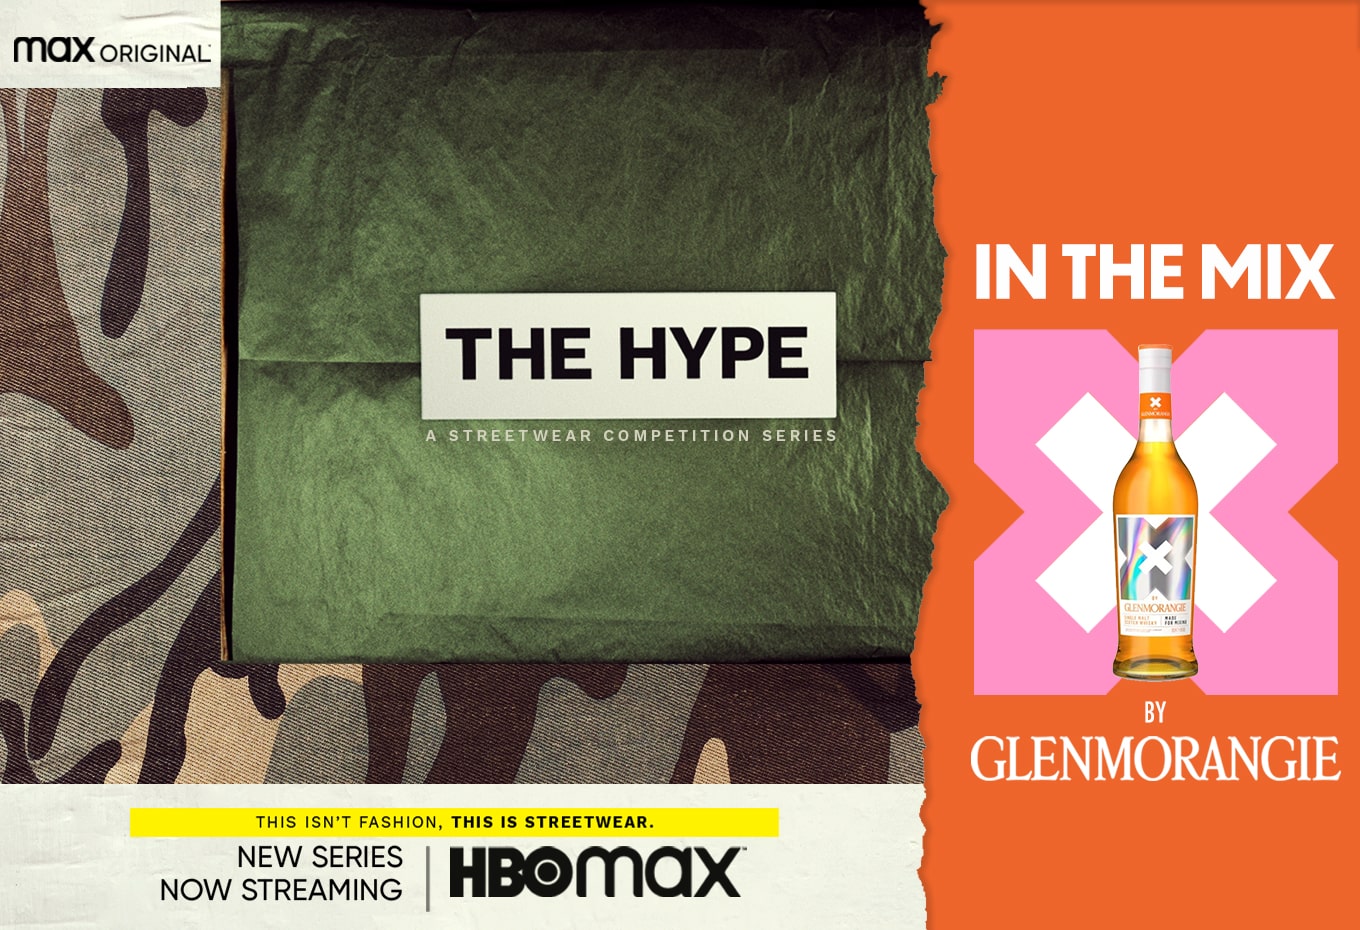 X BY GLENMORANGIE AND HBO MAX'S THE HYPE